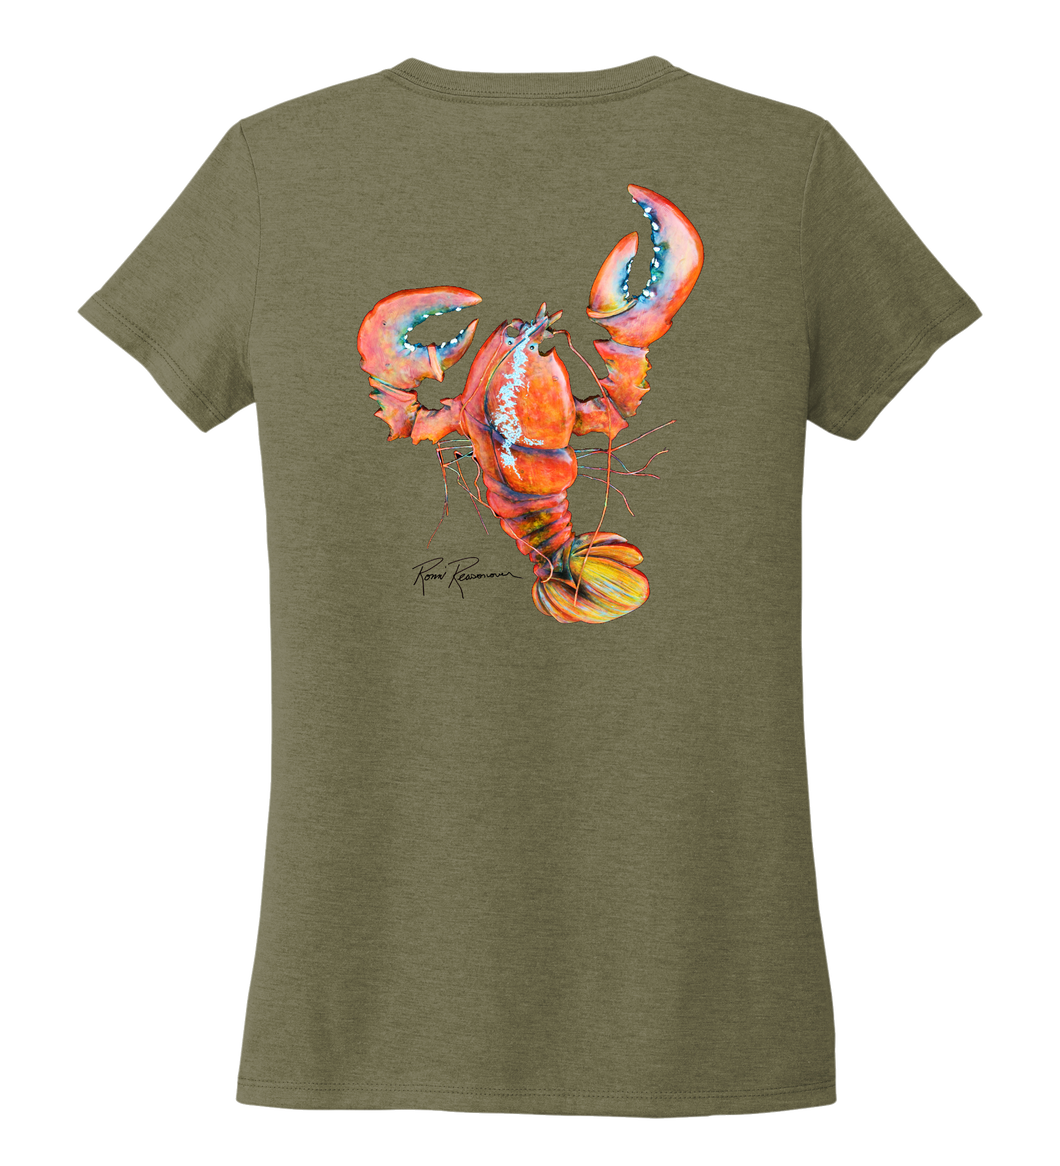 Ronnie Reasonover, The Lobster, Women's V-neck T-shirt in Earthy Green